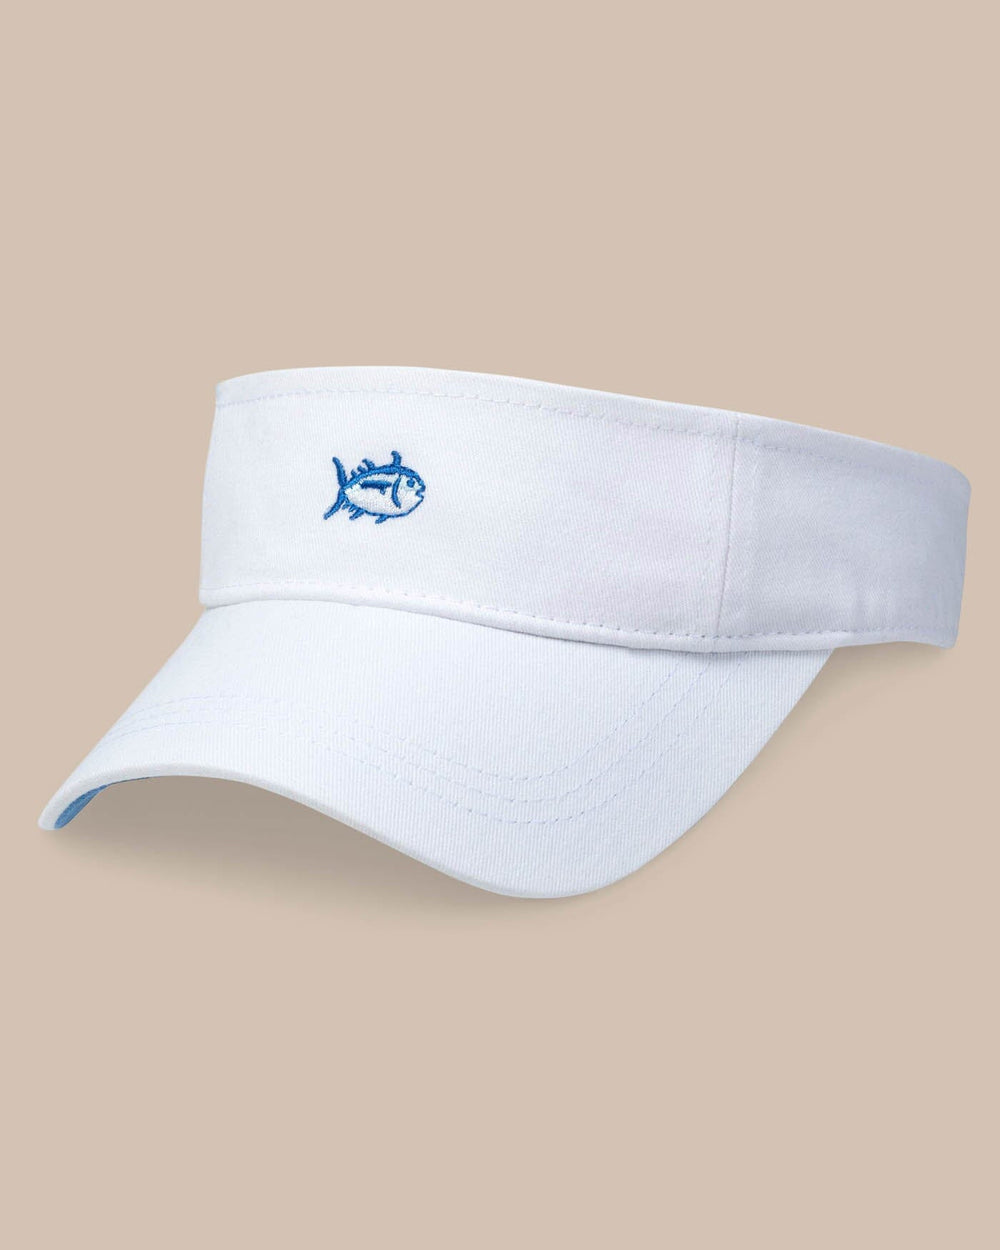 The front view of the Skipjack Visor by Southern Tide - White